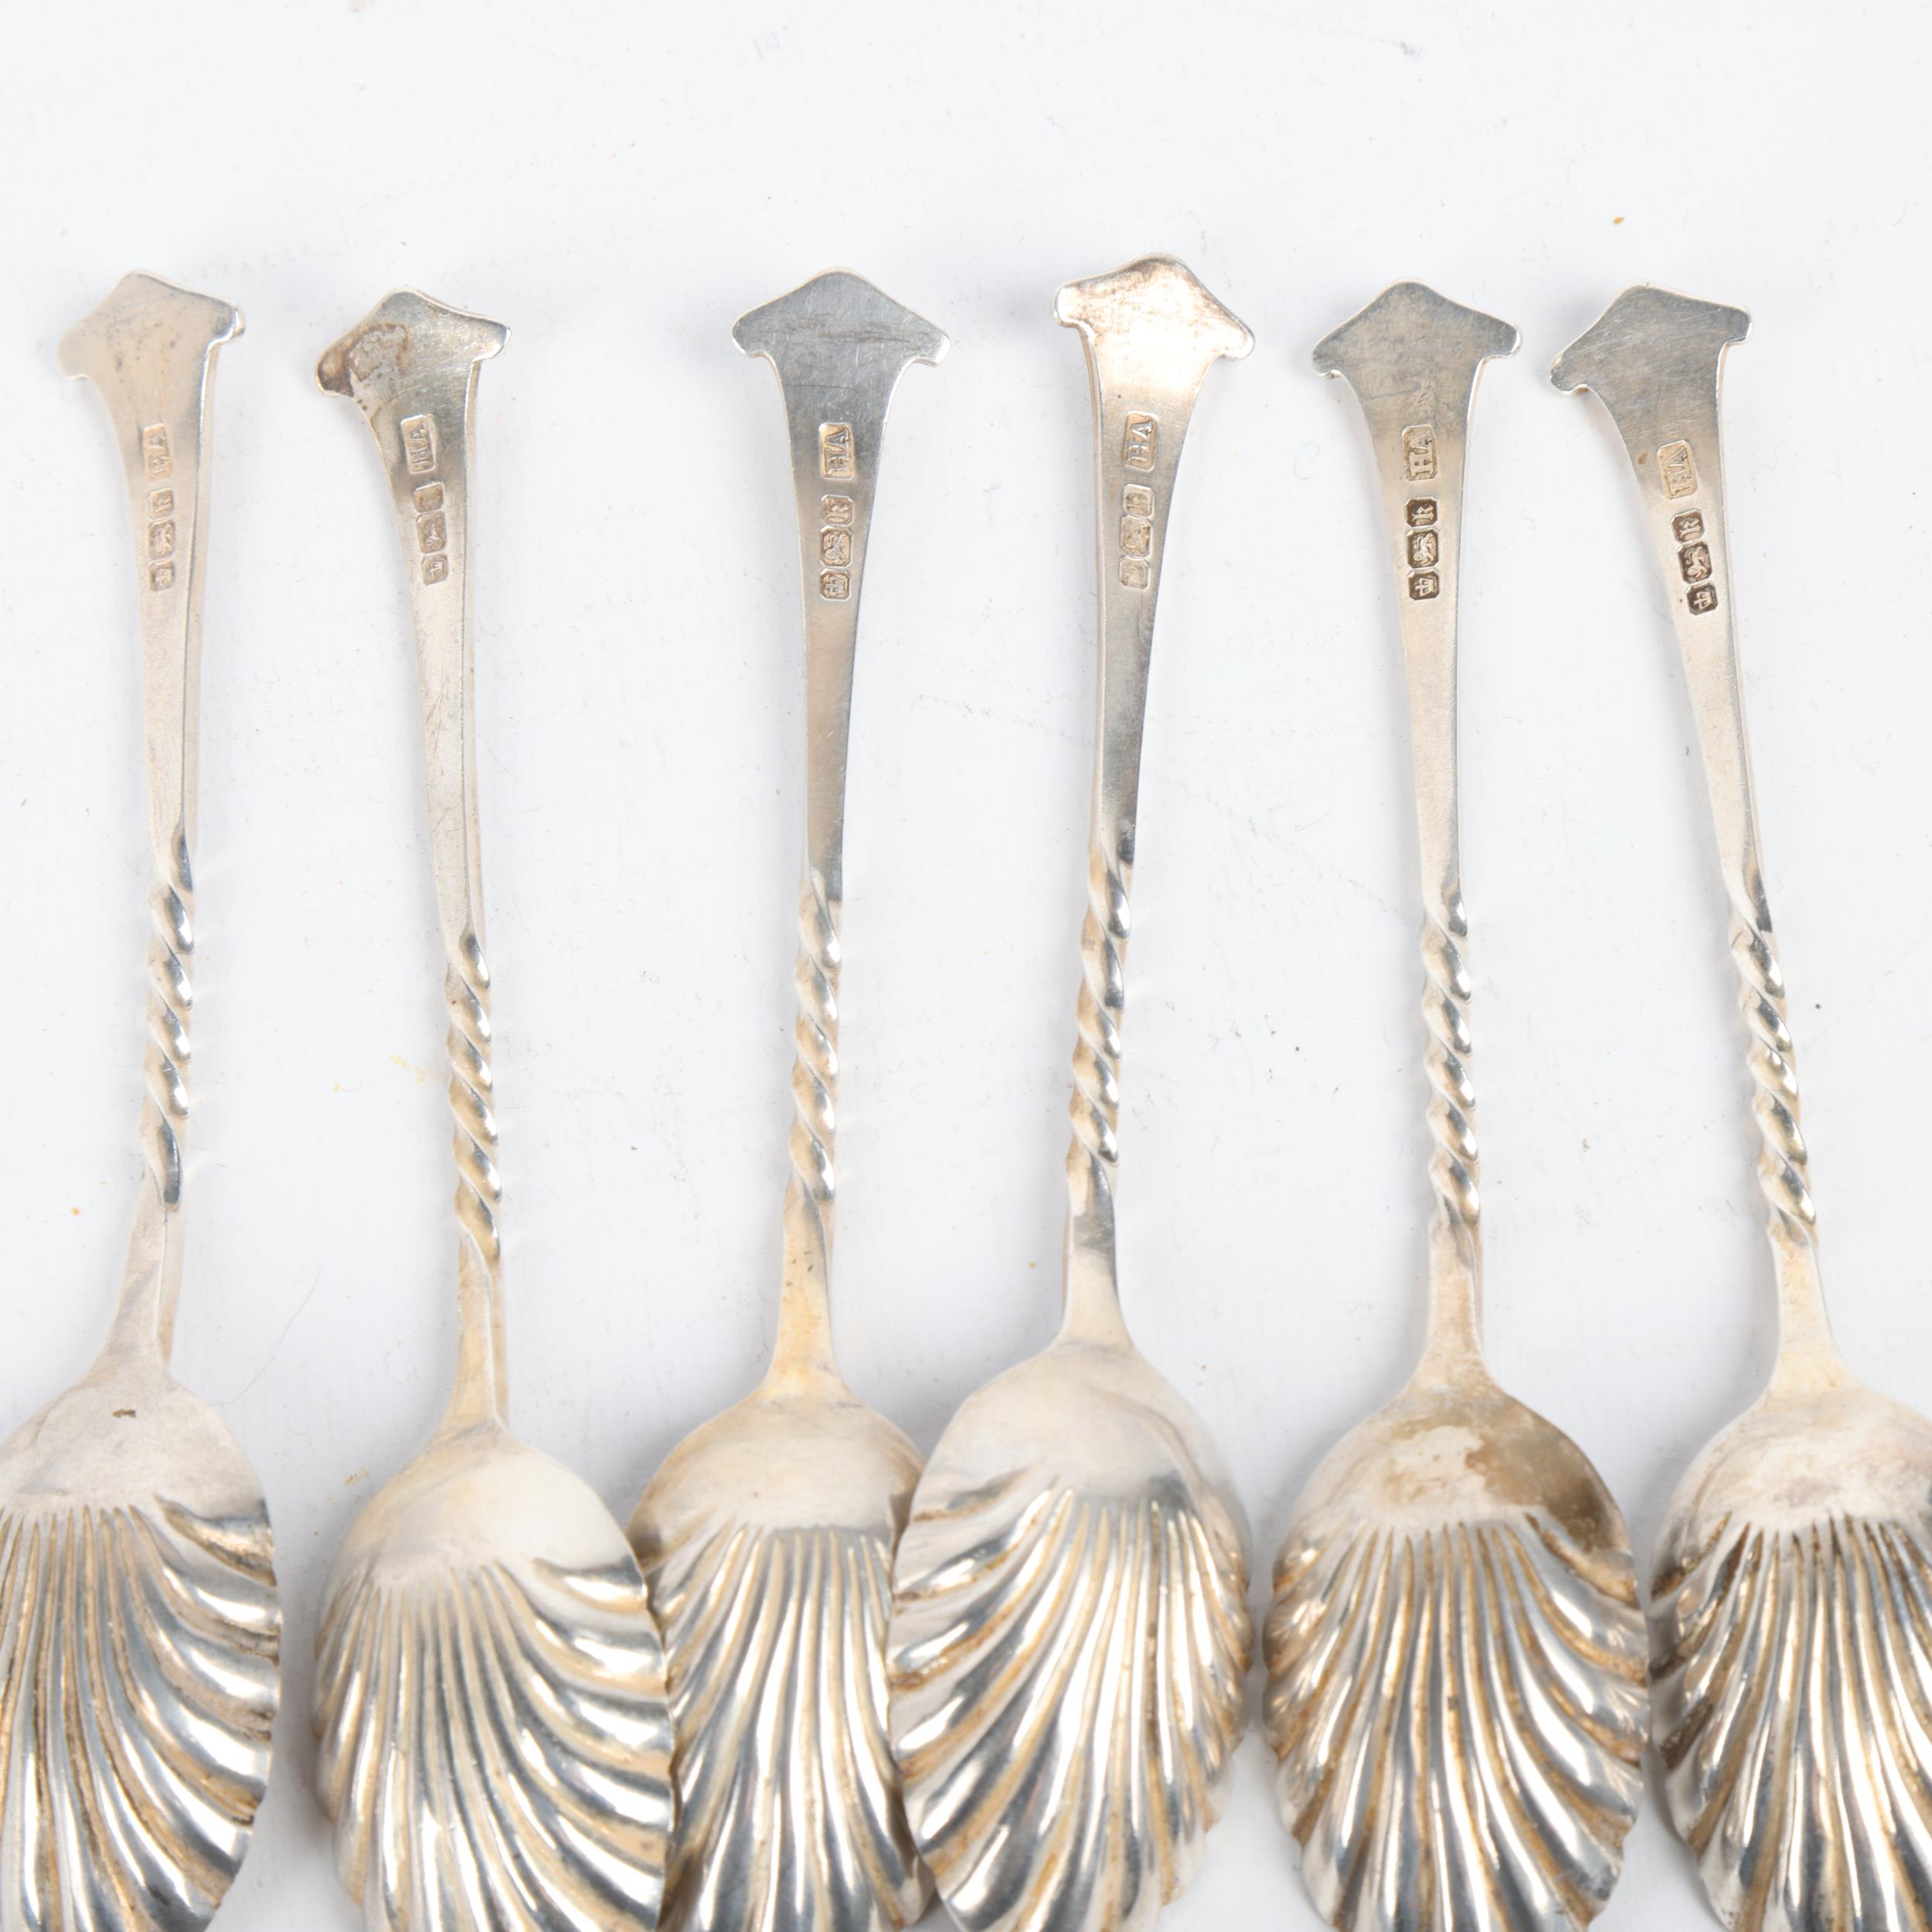 A set of 6 Edwardian silver shell teaspoons, Atkin Brothers, Sheffield 1902, 11.5cm, 2.7oz total - Image 3 of 3